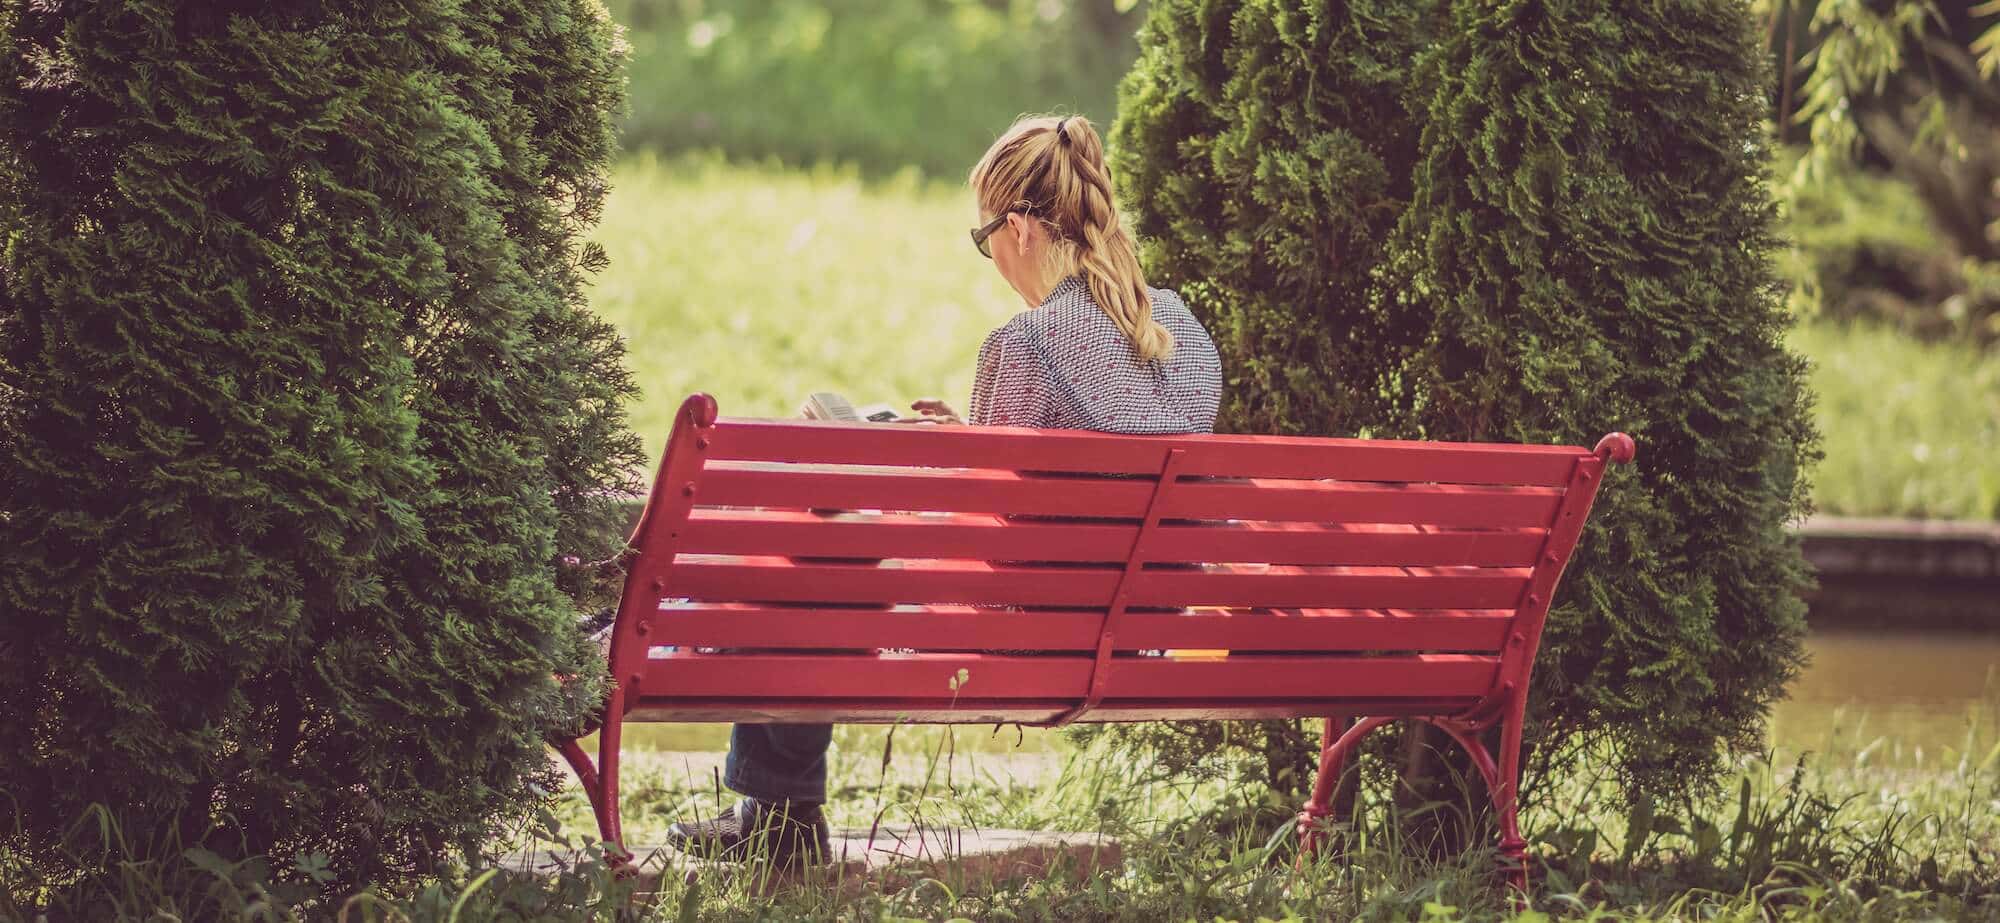 Woman-Reading-on-a-Bench